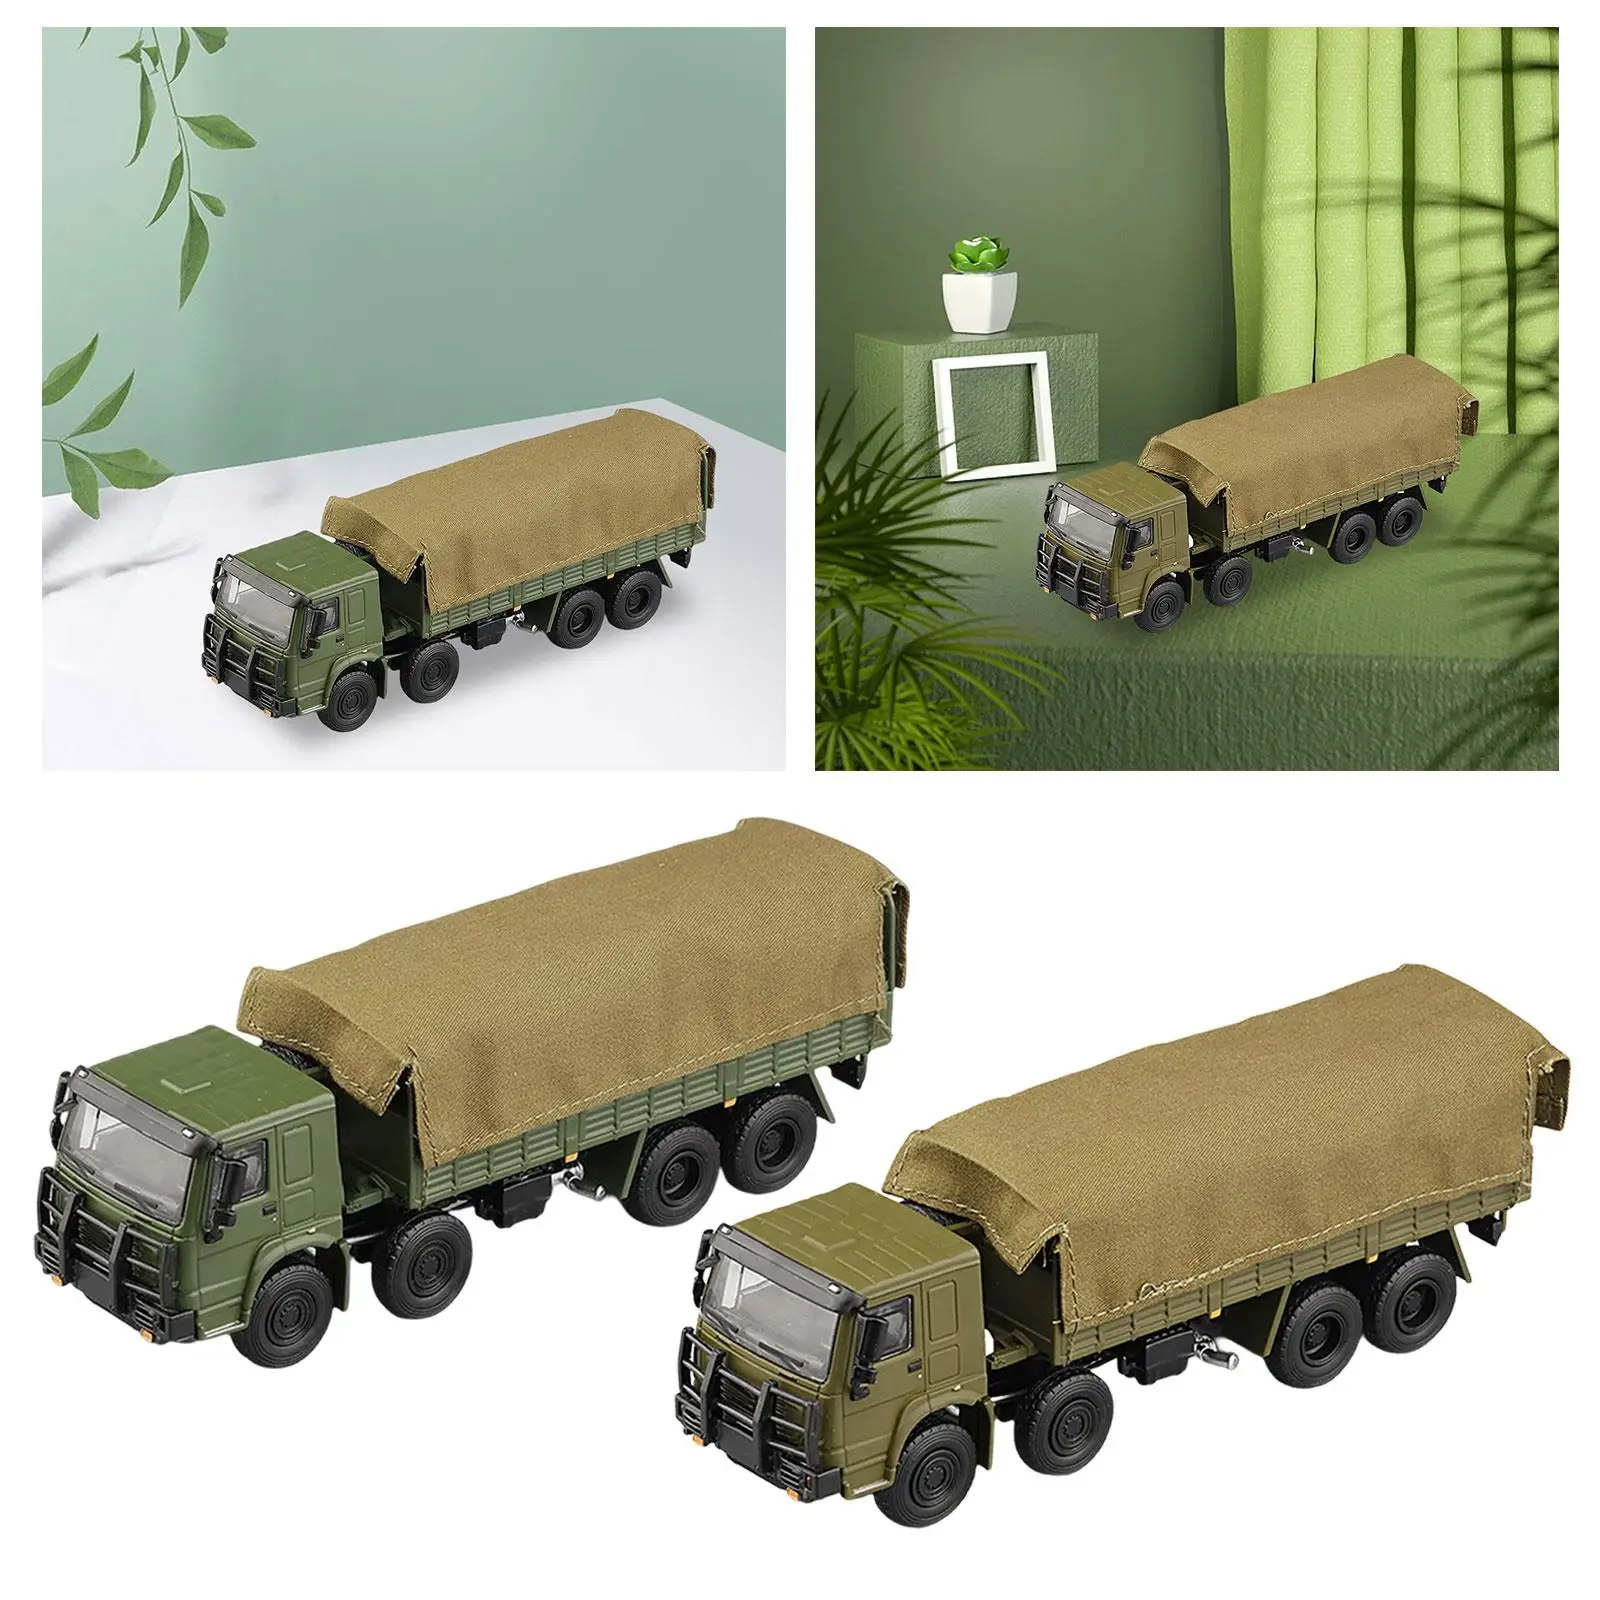 1/64 Realistic Car Vehicles Diecast Toys Children Gifts Collectibles for Diorama Miniature Scene Photography Props Accessories